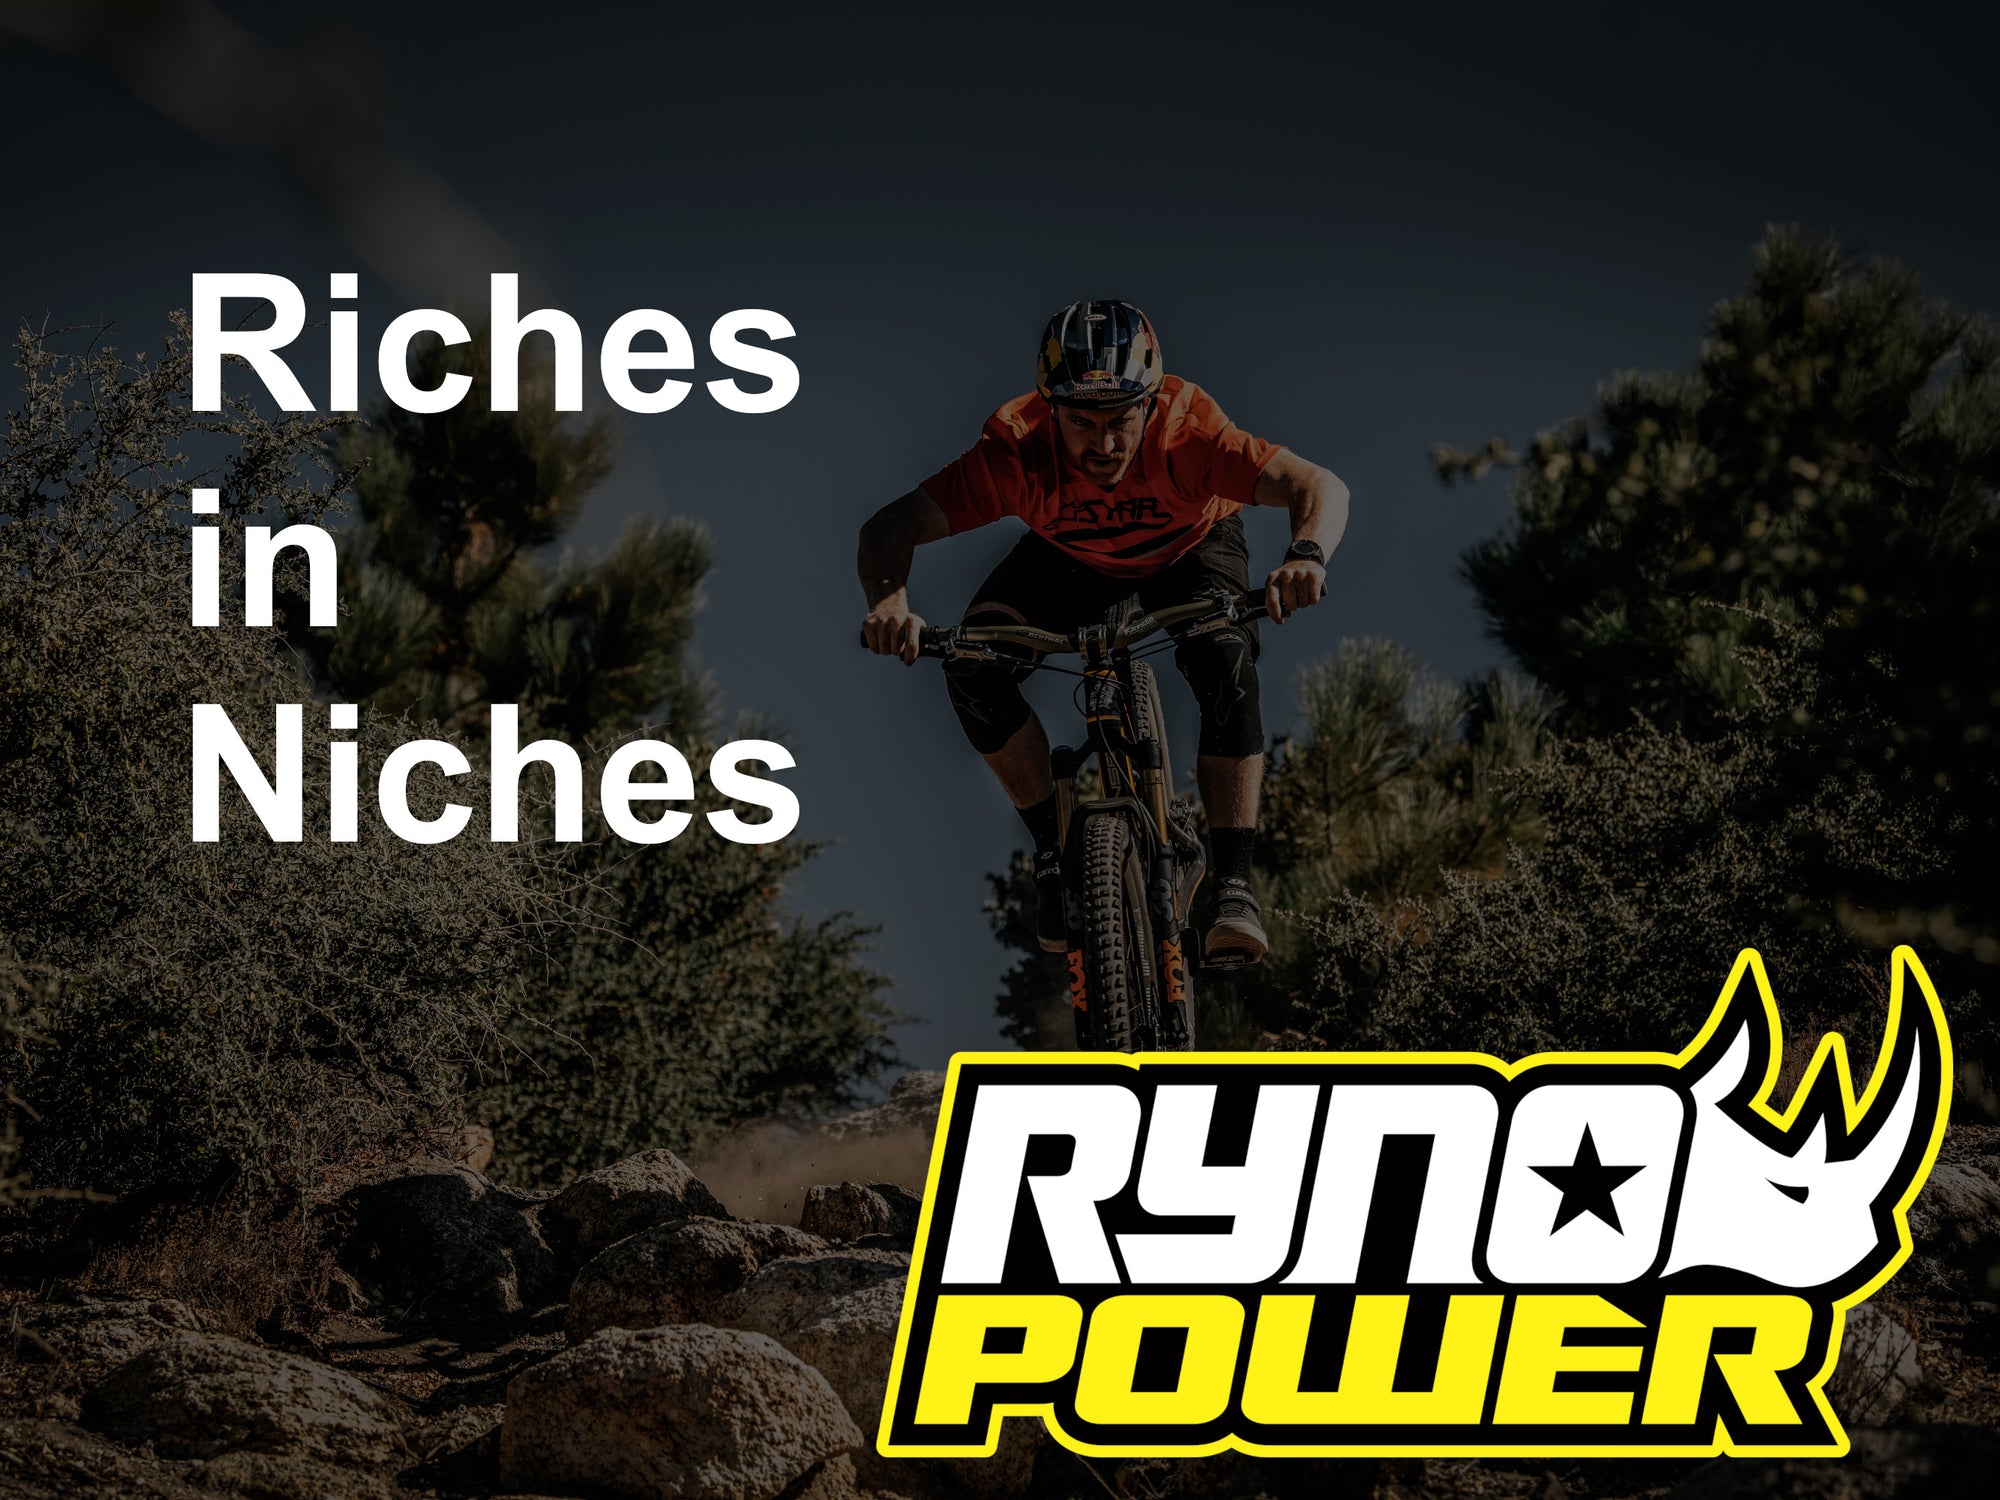 Episode 89 - Shopify Riches in Motocross Niches with Ryno Power